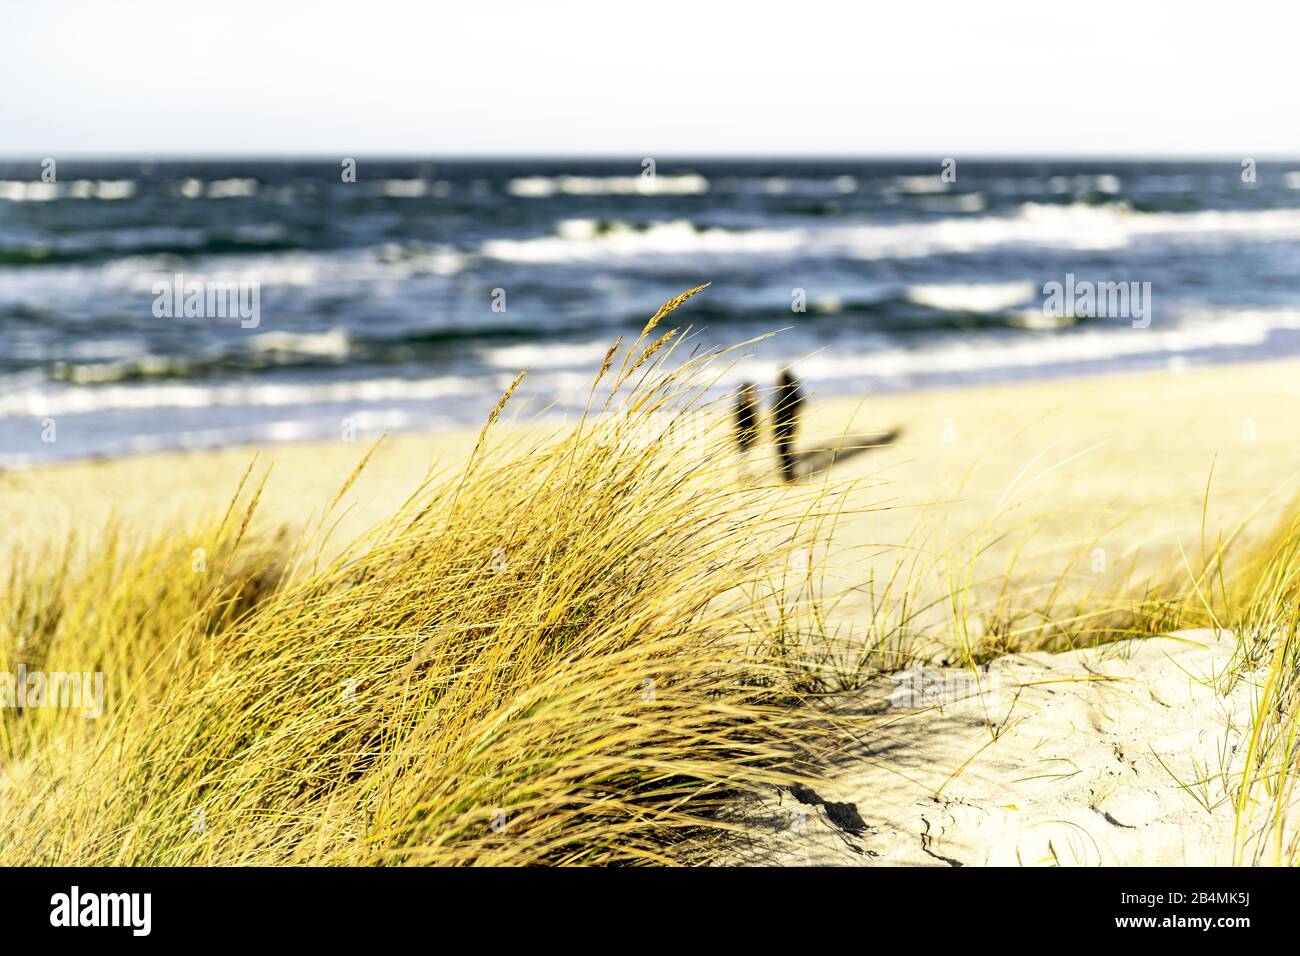 View over the dune grass on the Baltic Sea beach, on which a couple is standing Stock Photo